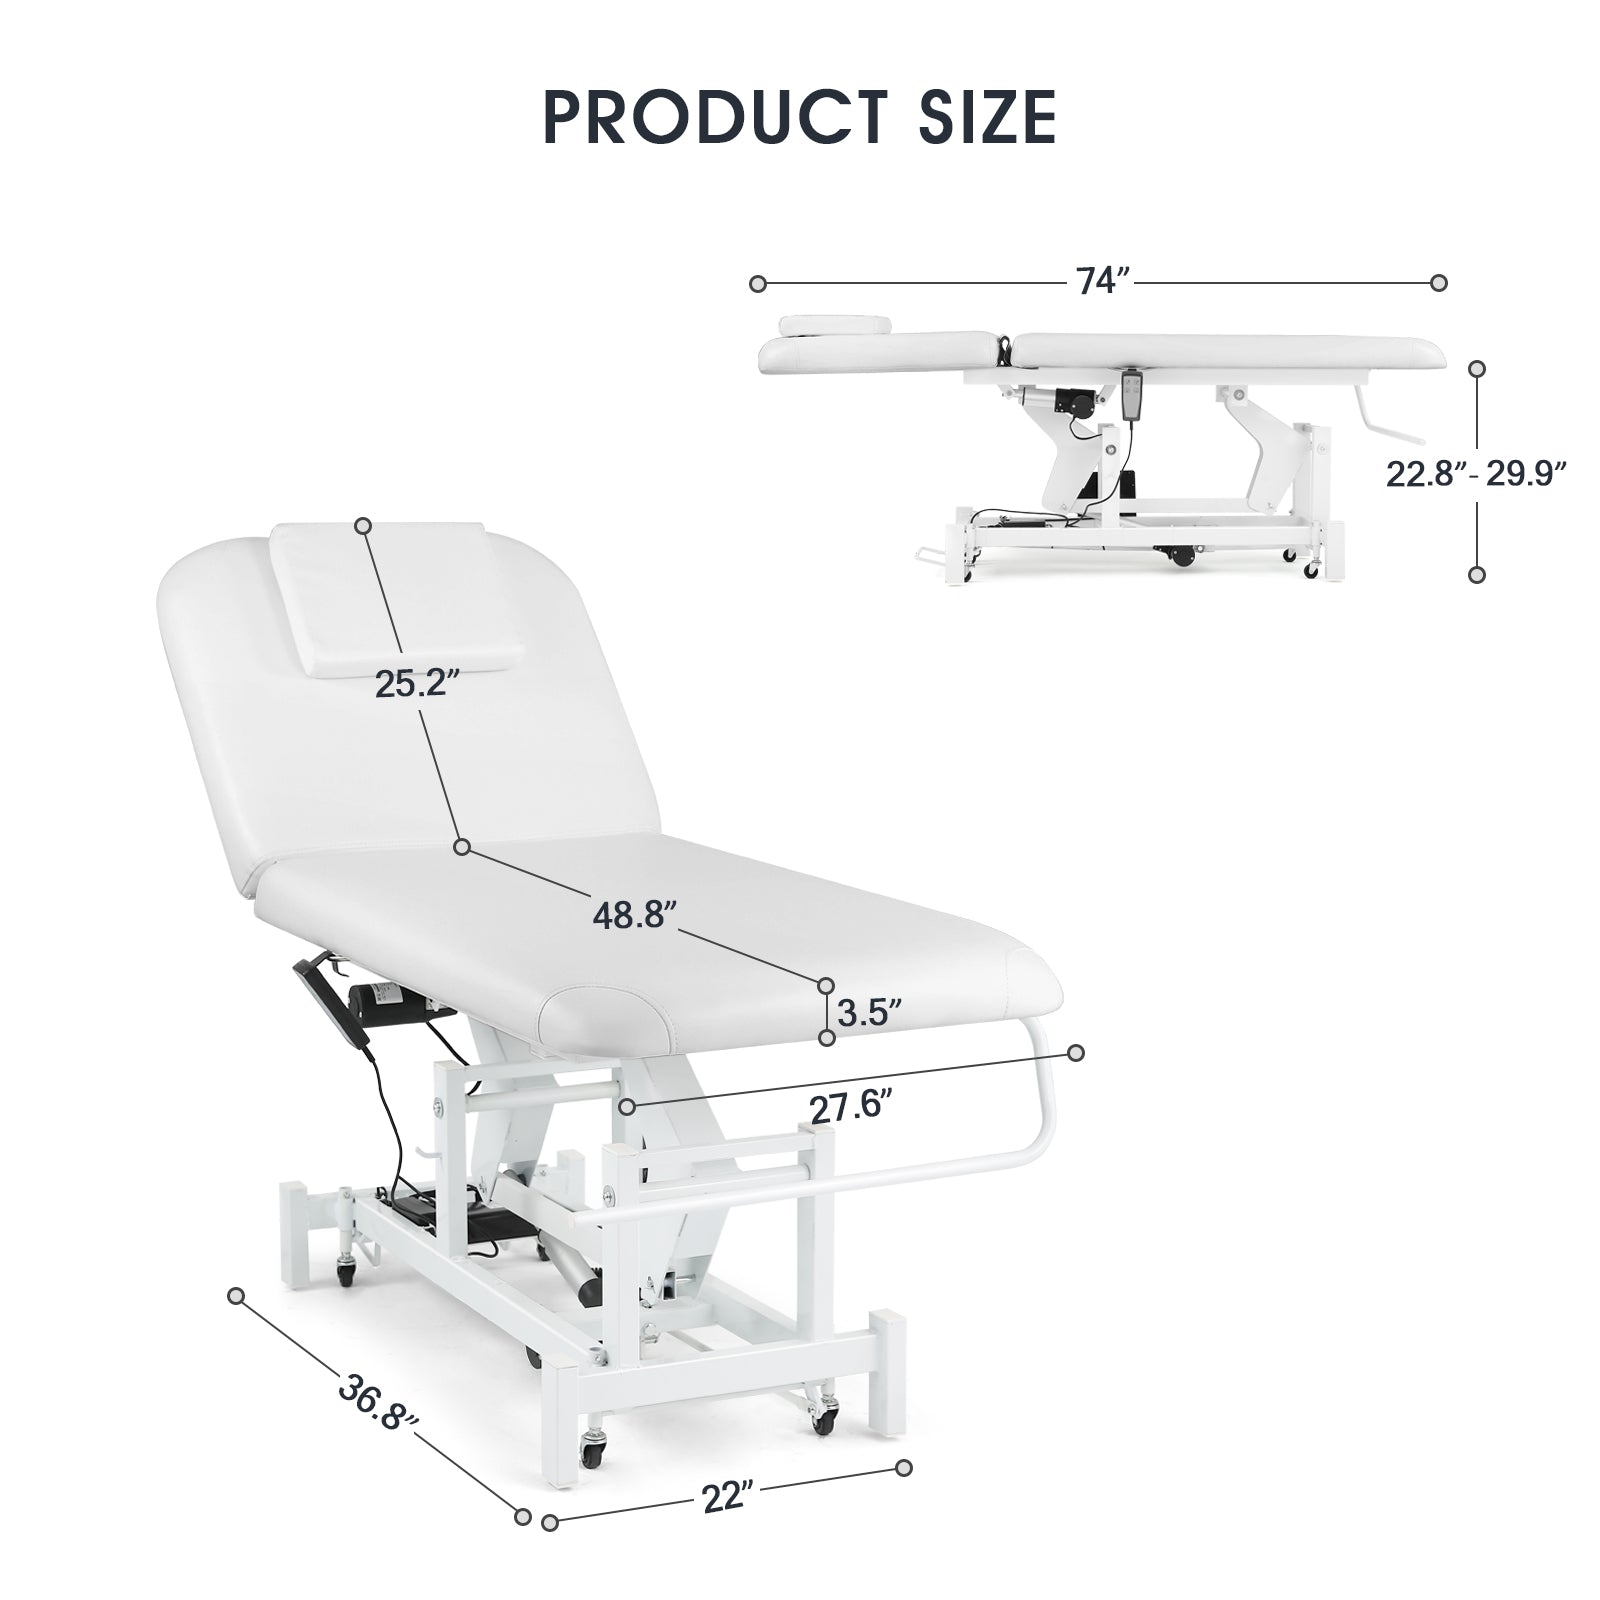 #2010 Electrical Facial Bed for Esthetician 110V Removable Massage Table 2 Motor Beauty Bed Medical Aesthetic Tattoo Chair with Adjustments, Hand/Foot-Operated